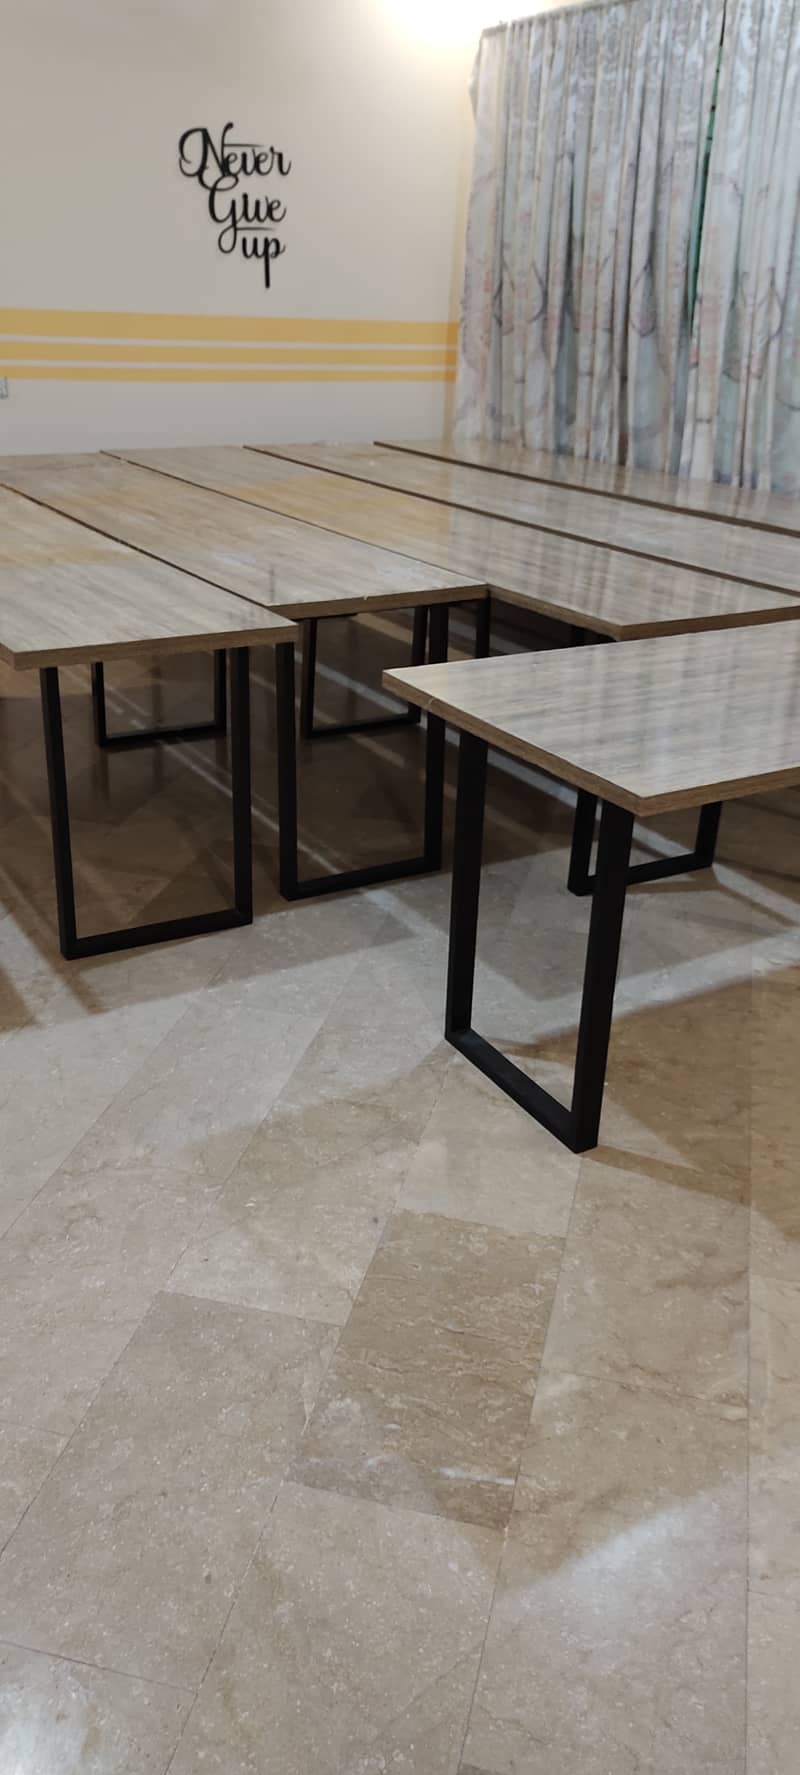 7 COMPUTER TABLE RS. 1150 PER SQ. FT. FOR CALL CENTER OR SOFTWARE HOUSE 9